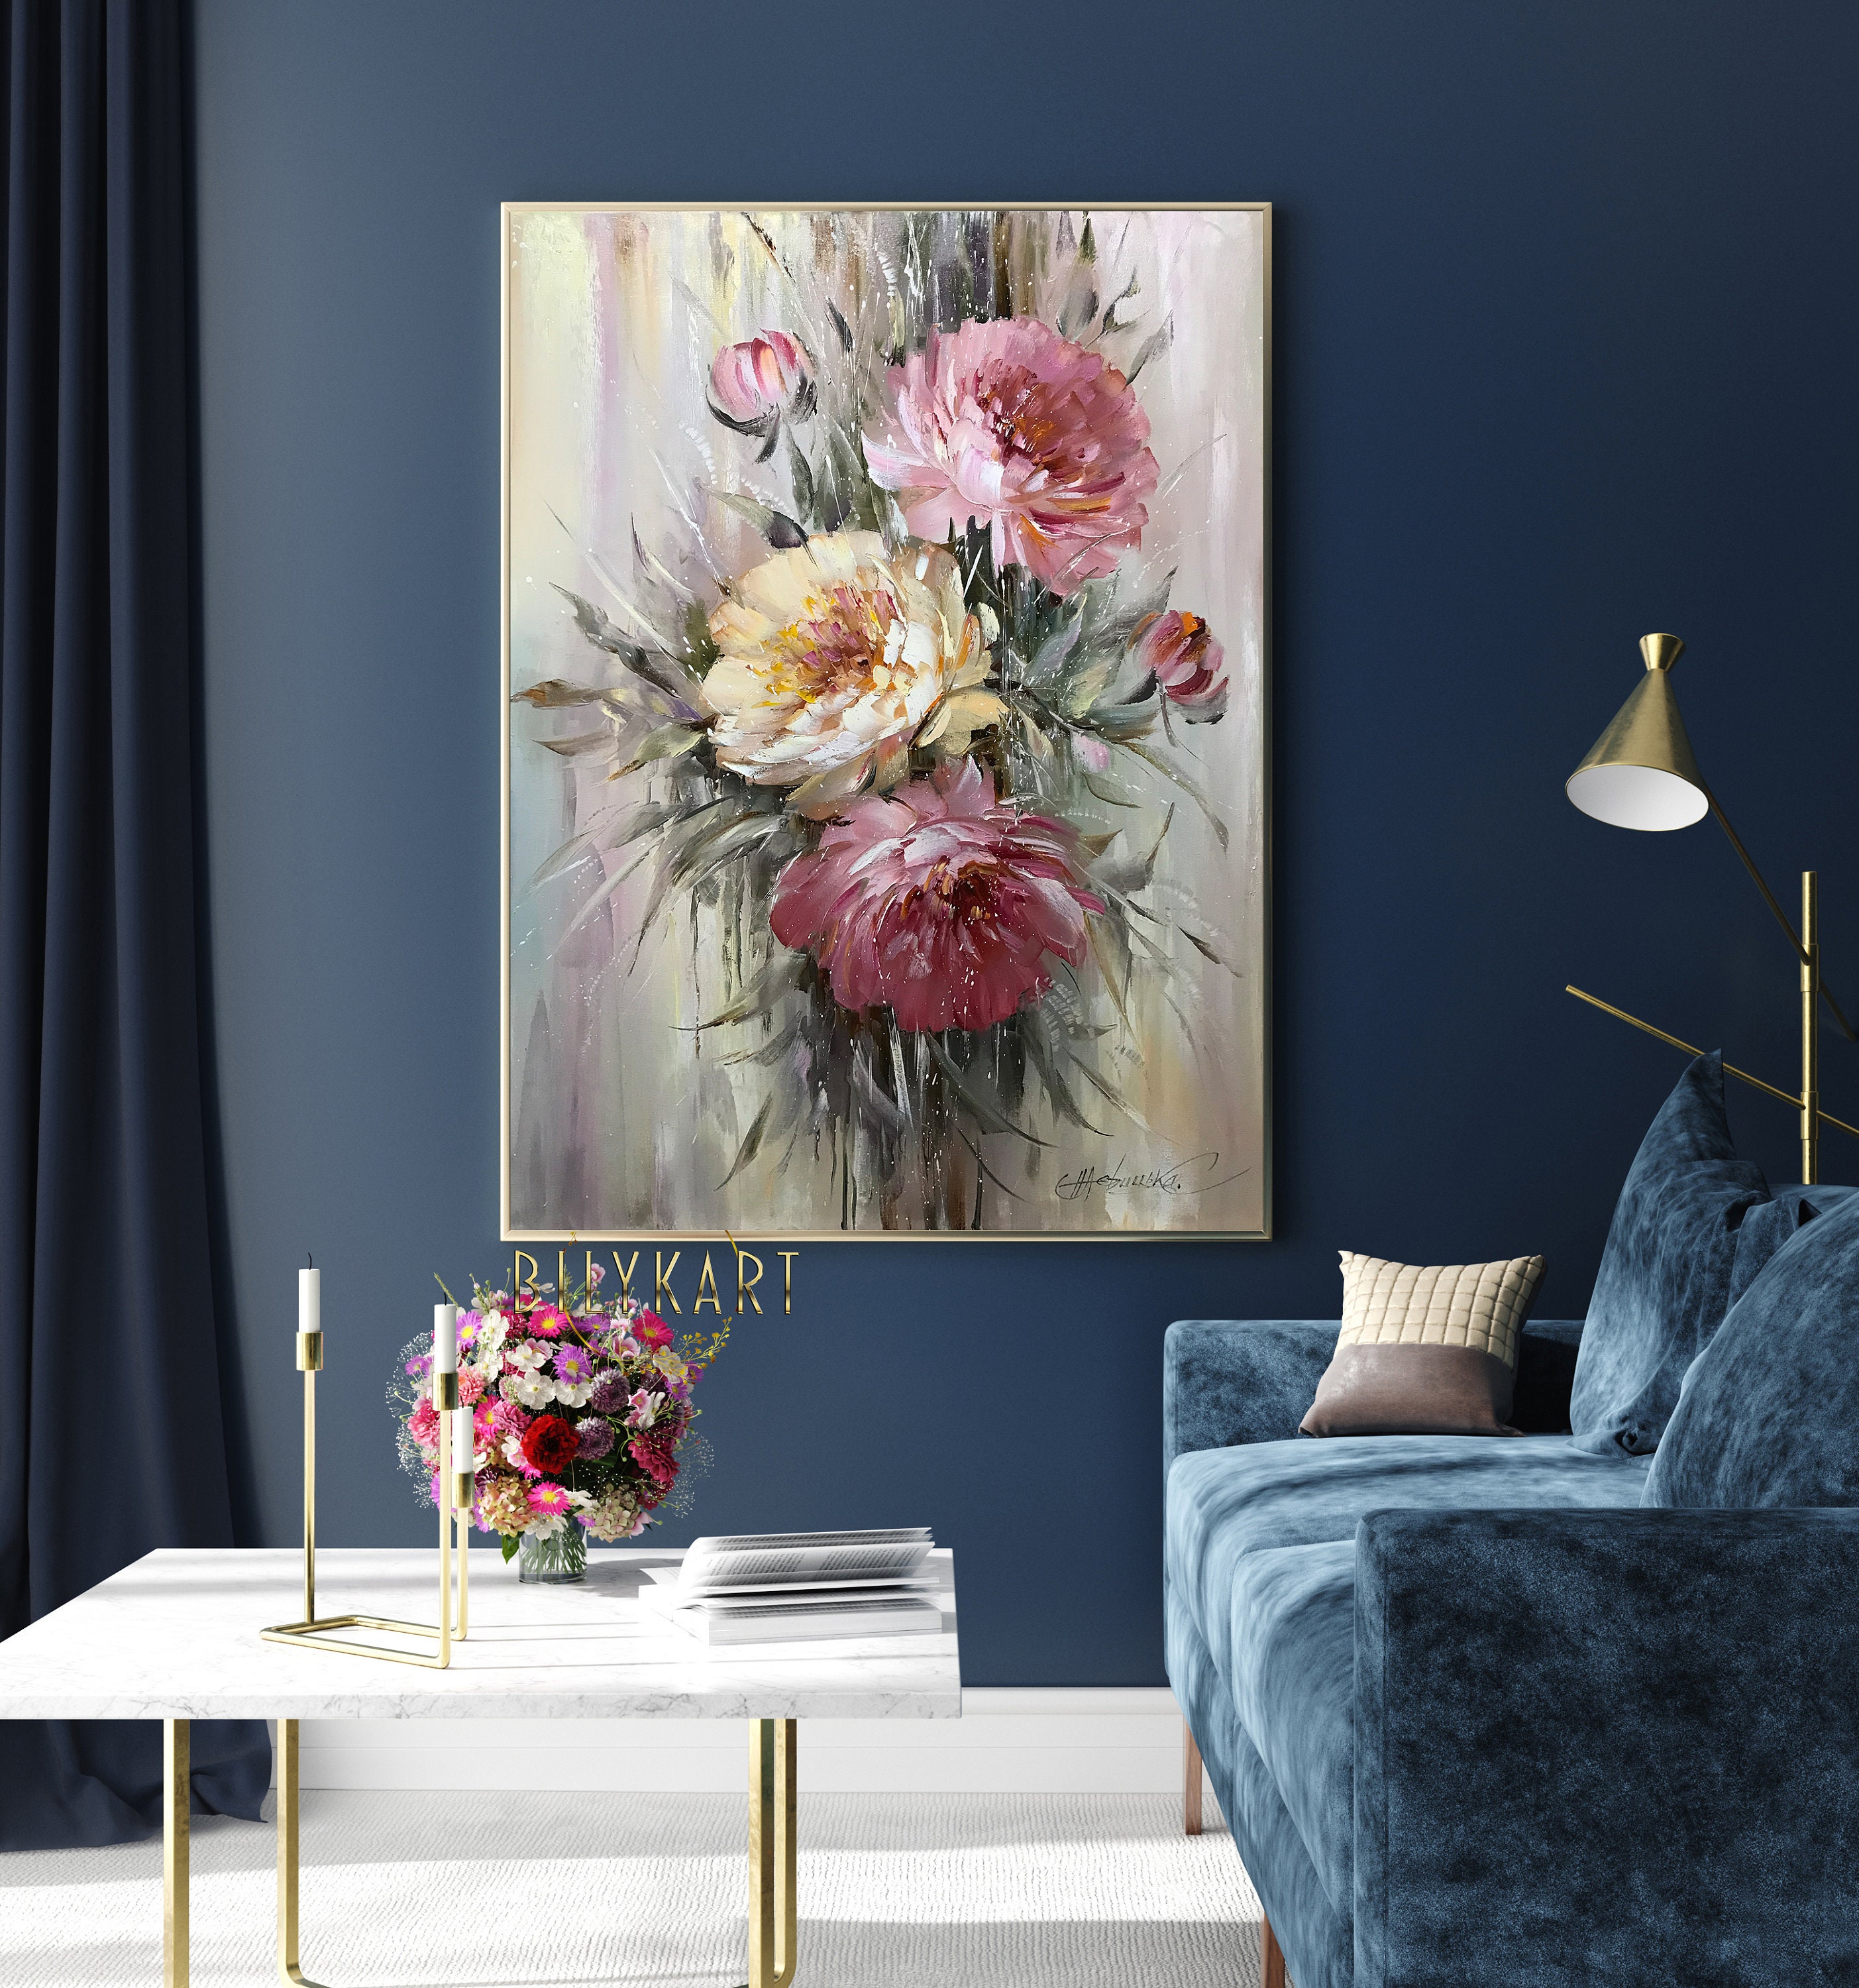 Abstract Floral Paintings on Canvas Oversized Modern Room | Etsy